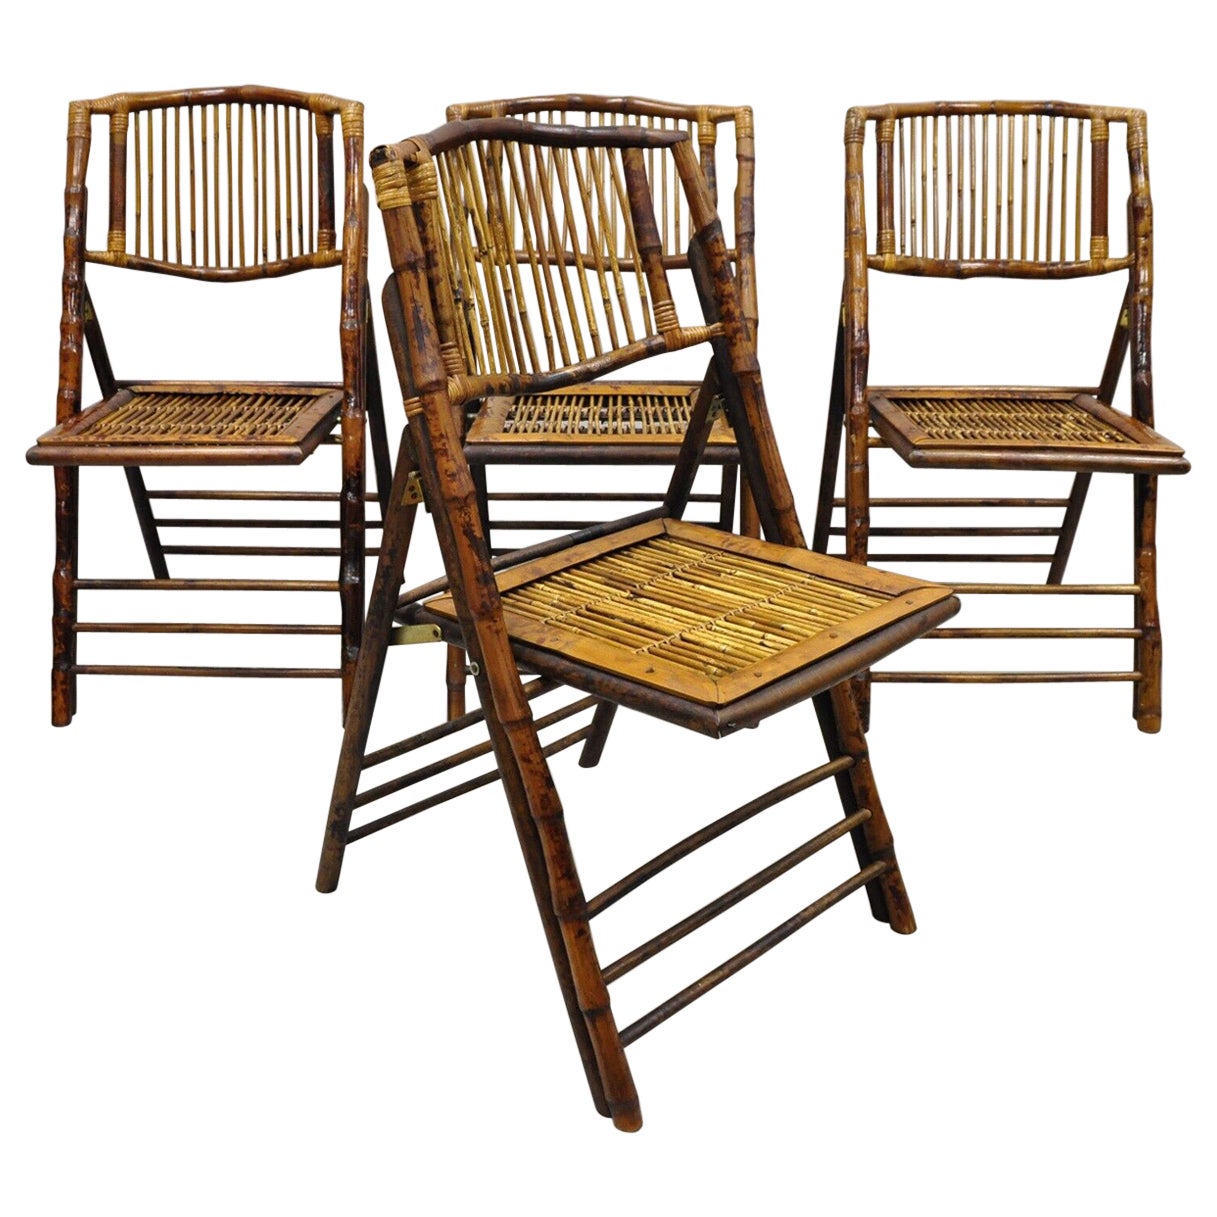 Bamboo Wooden Folding Chairs for Game Table or Events, Set of 4